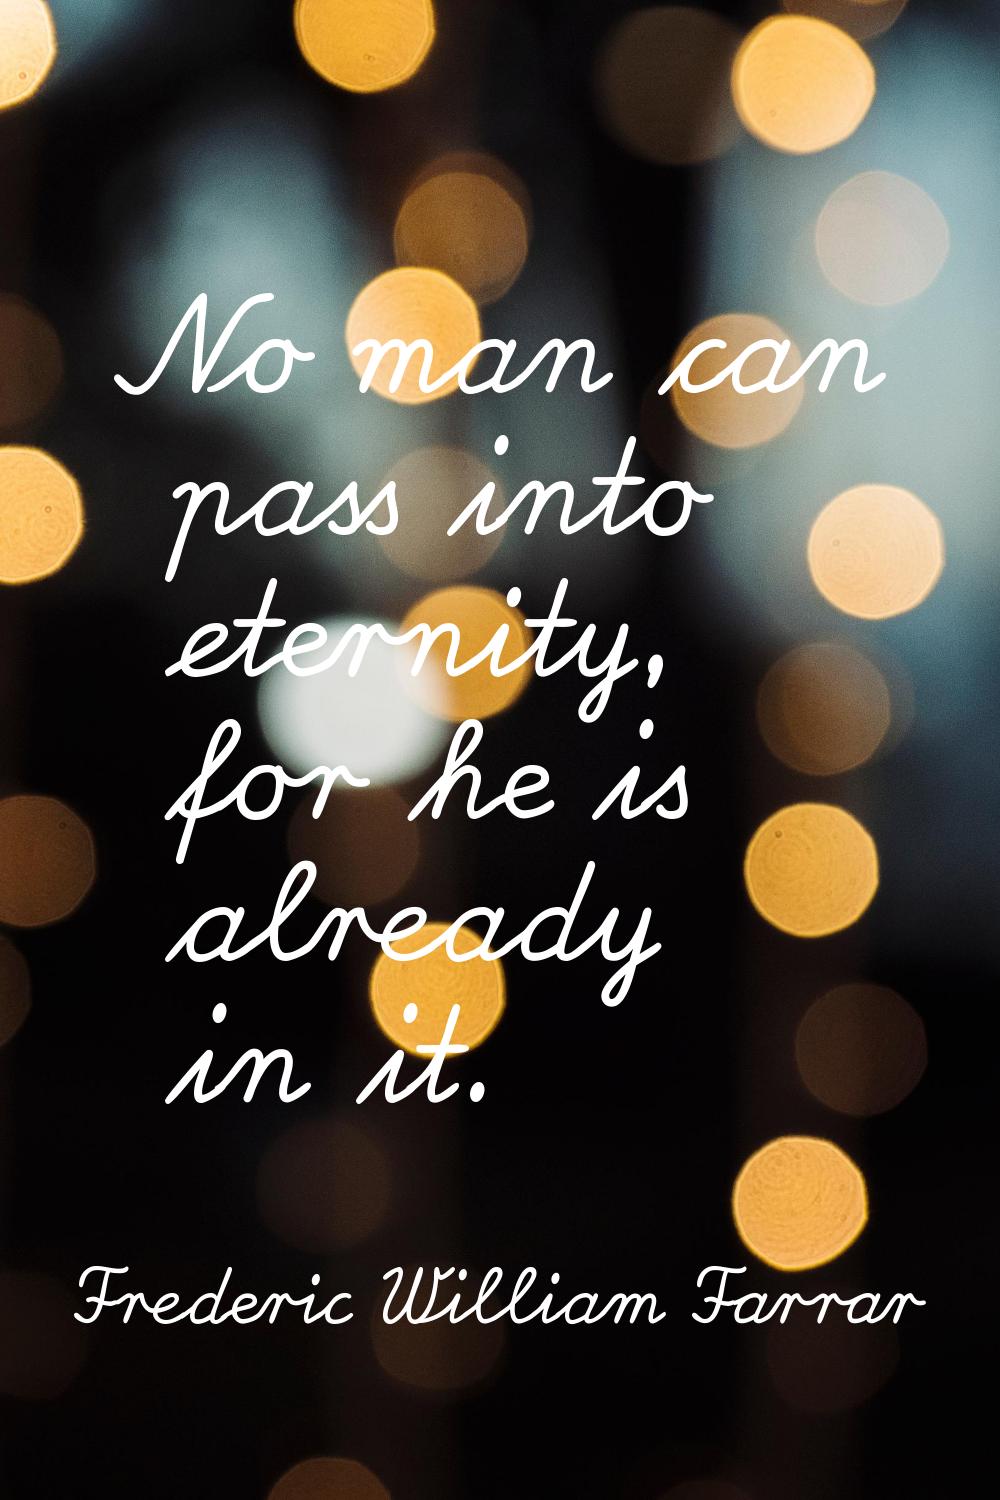 No man can pass into eternity, for he is already in it.